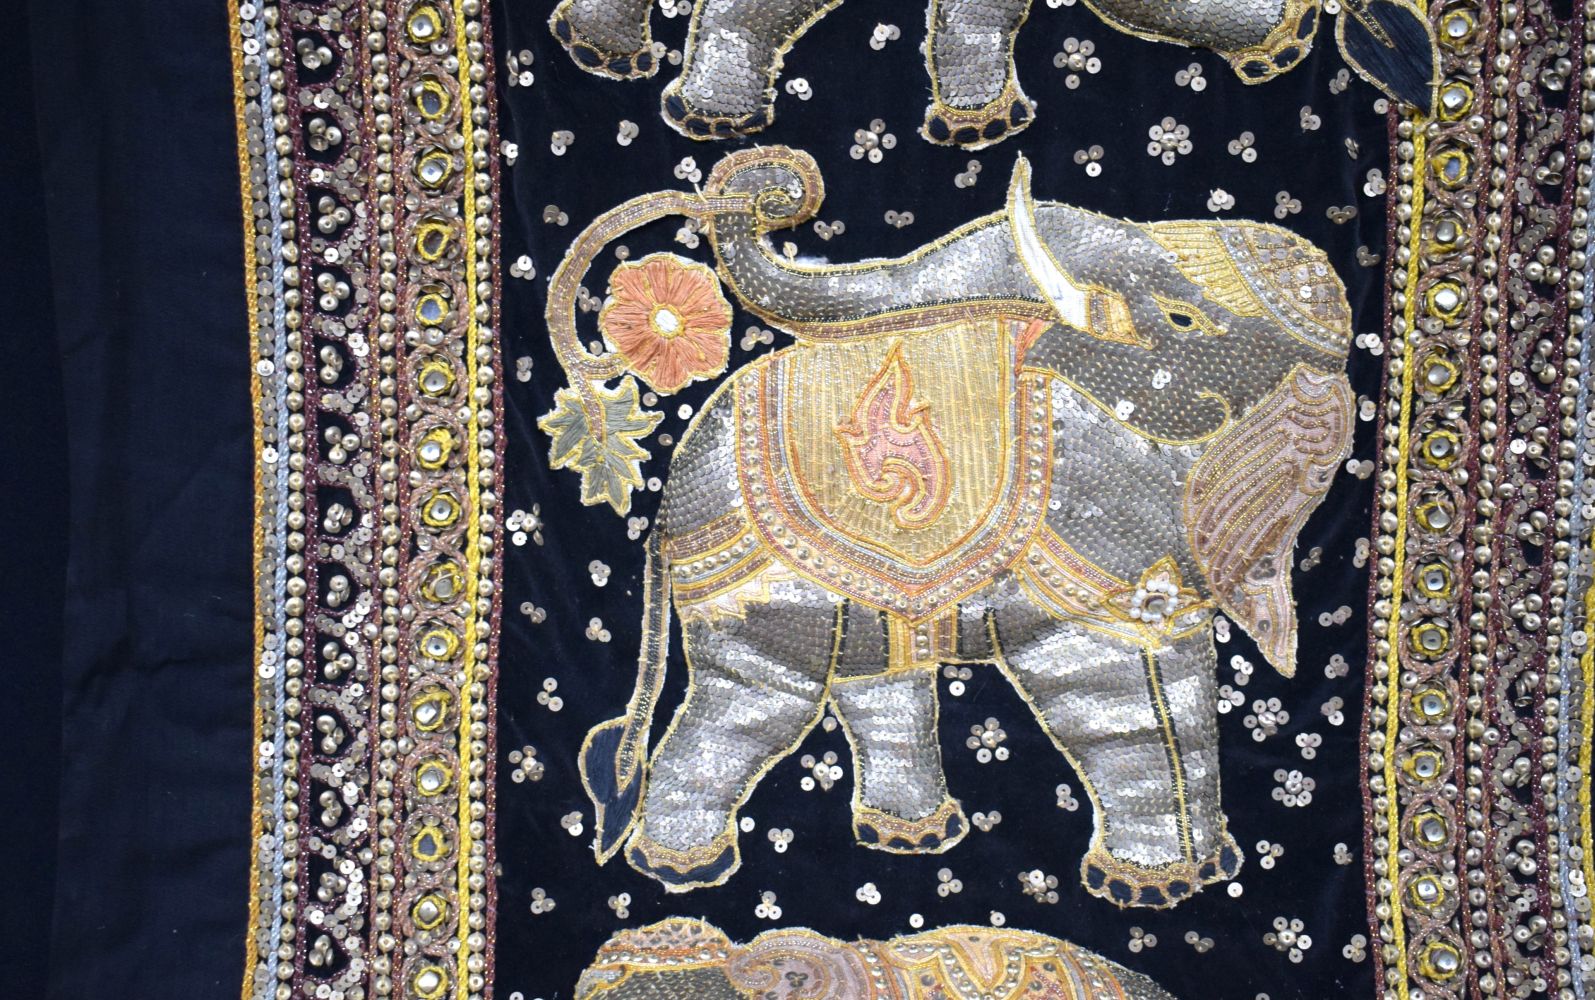 An Embroidered South East Asian Elephant wall hanging 104 x 60 cm. - Image 9 of 12